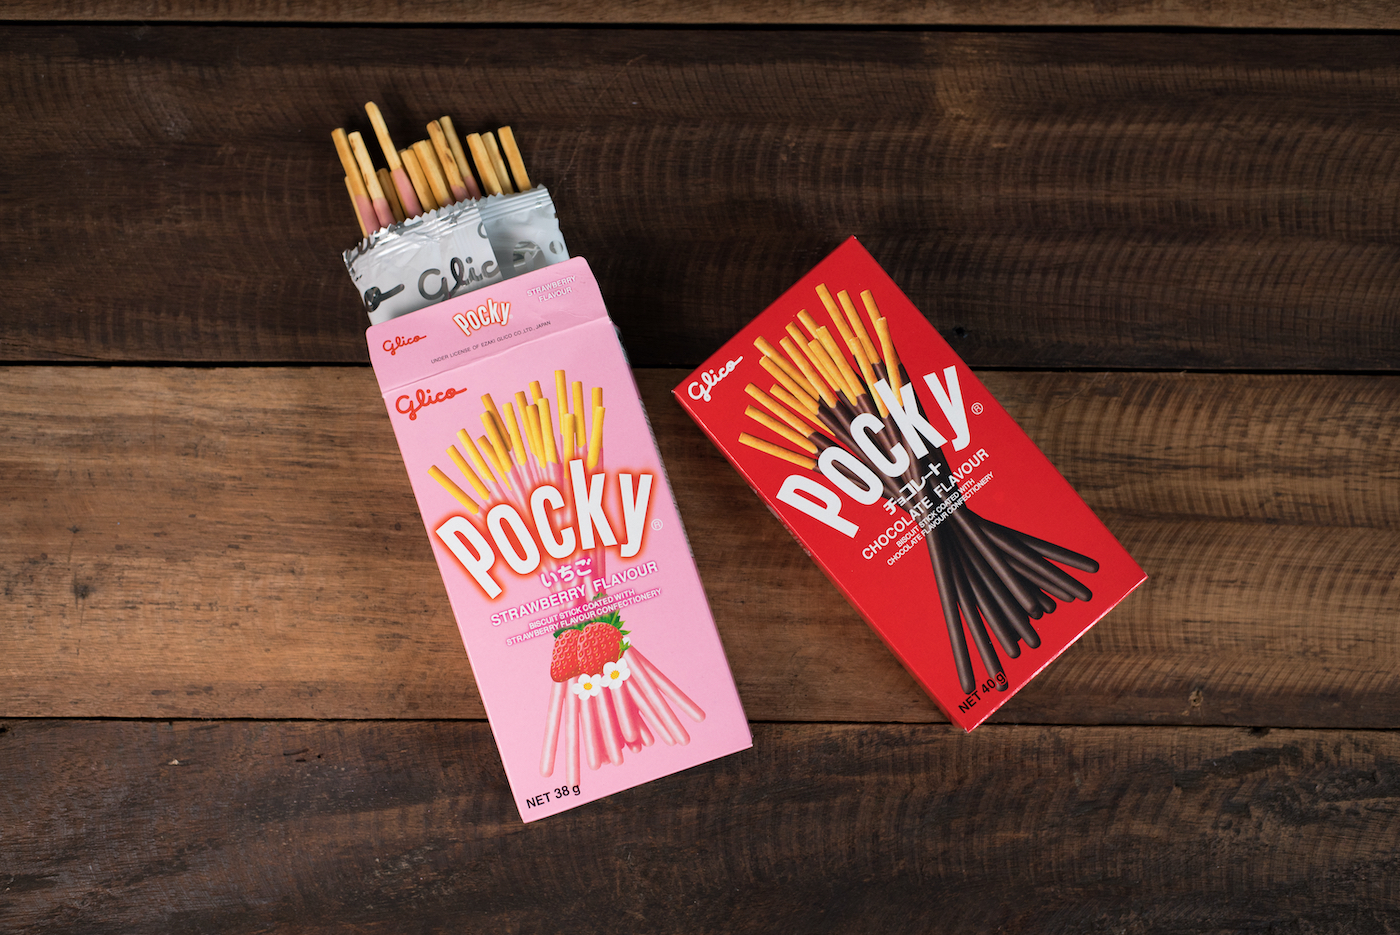 Pocky brand of chocolate sticks on wooden background. Pocky is a famous Japanese confectionery among Asian people